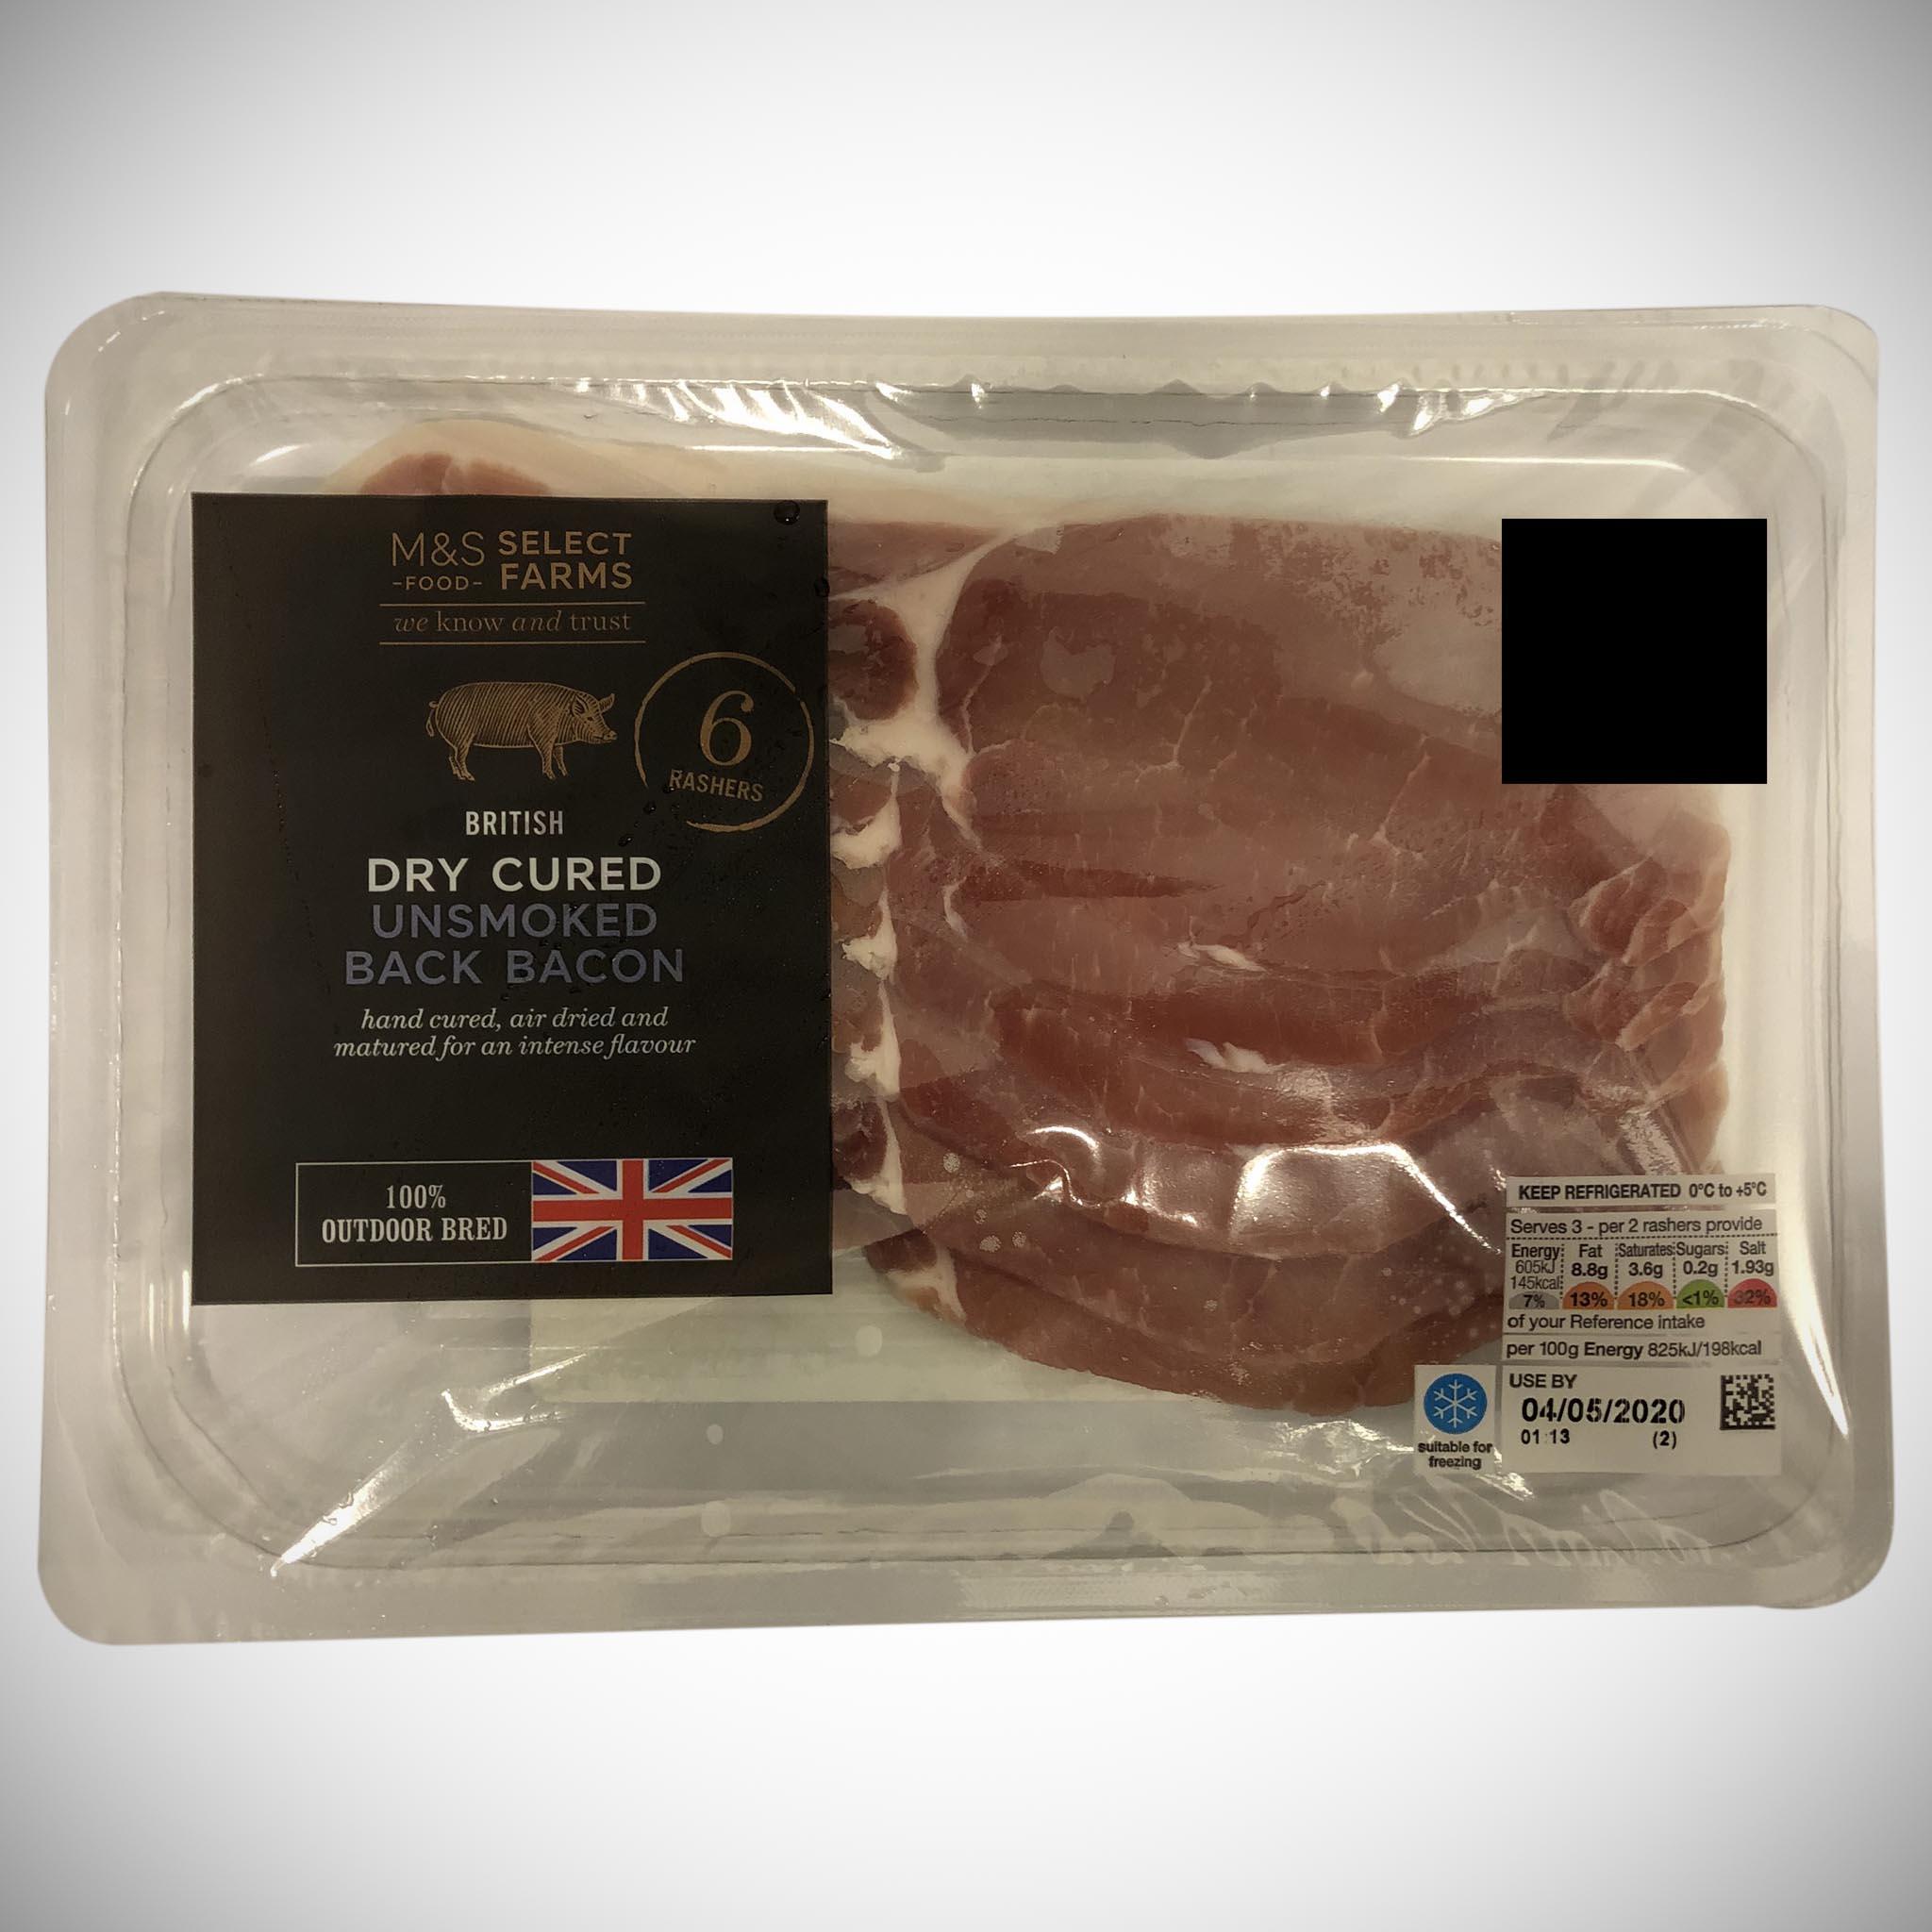 Outdoor Bred Unsmoked Back Bacon (6 Rashers) 220g